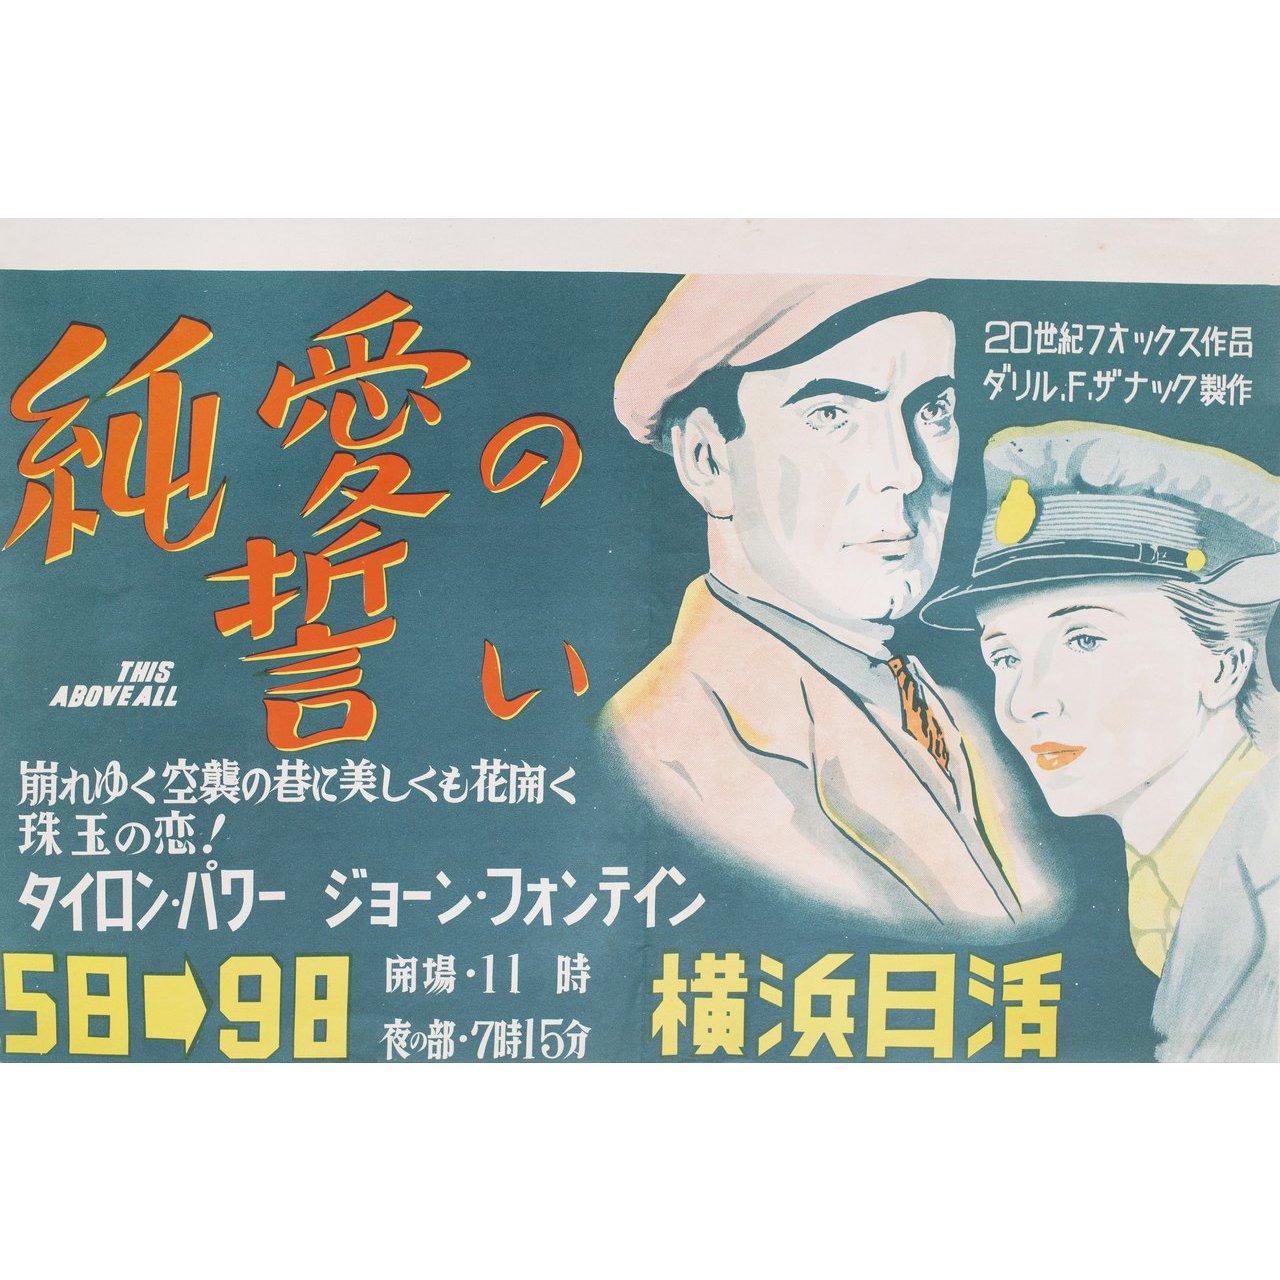 Original 1940s Japanese poster for the first Japanese theatrical release of the film This Above All directed by Anatole Litvak with Tyrone Power / Joan Fontaine / Thomas Mitchell / Henry Stephenson. Very good-fine condition, folded. Many original